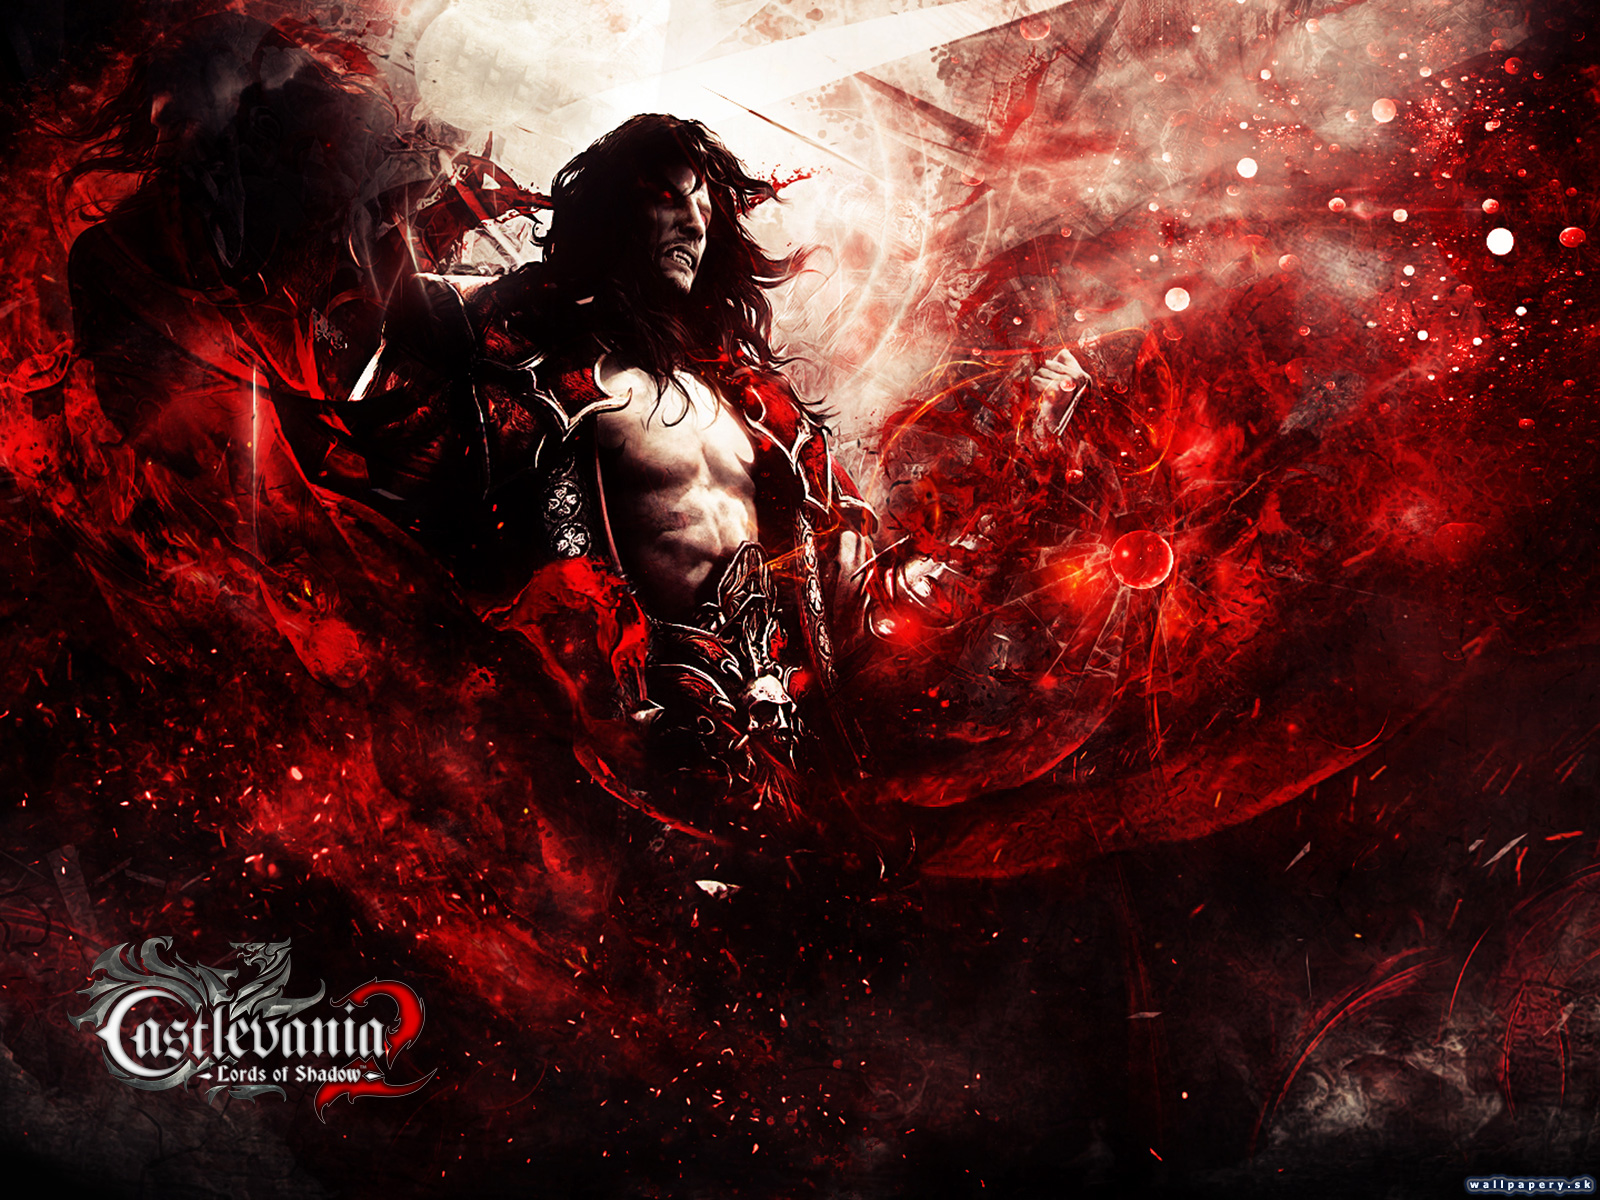 Castlevania lords of shadow steam фото 12